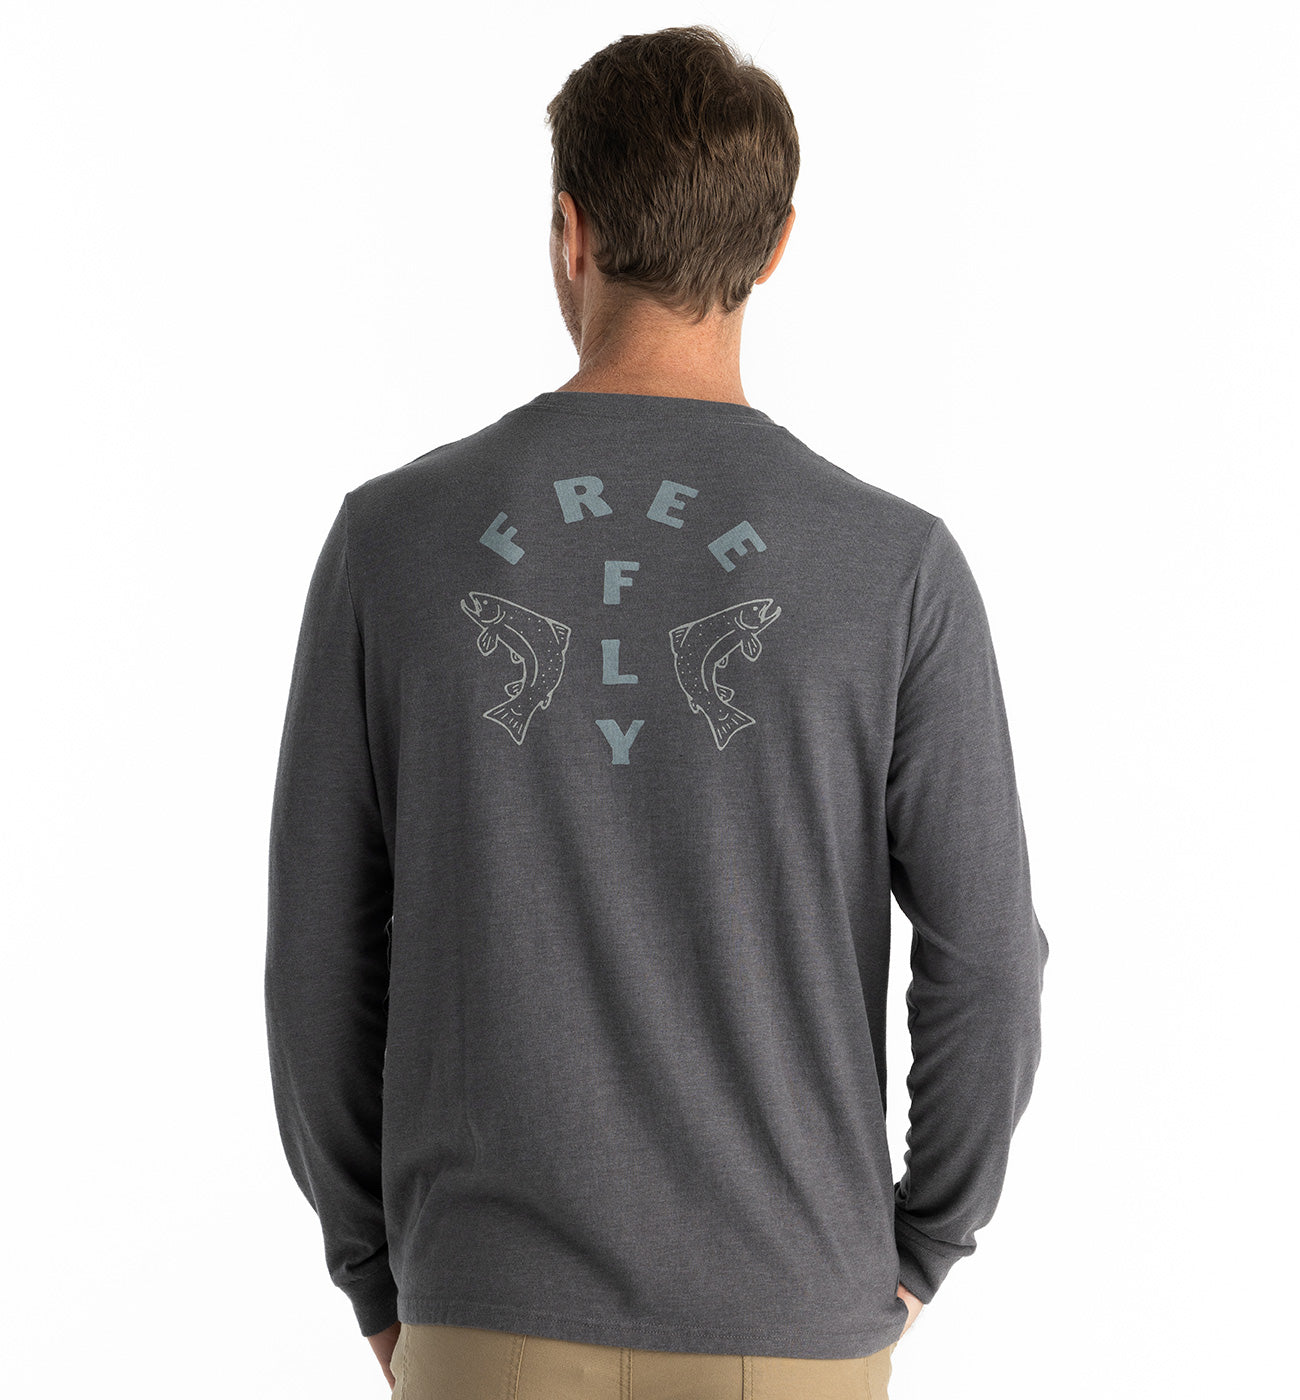 Doubled Up Long Sleeve - Heather Black Sand – Free Fly Apparel